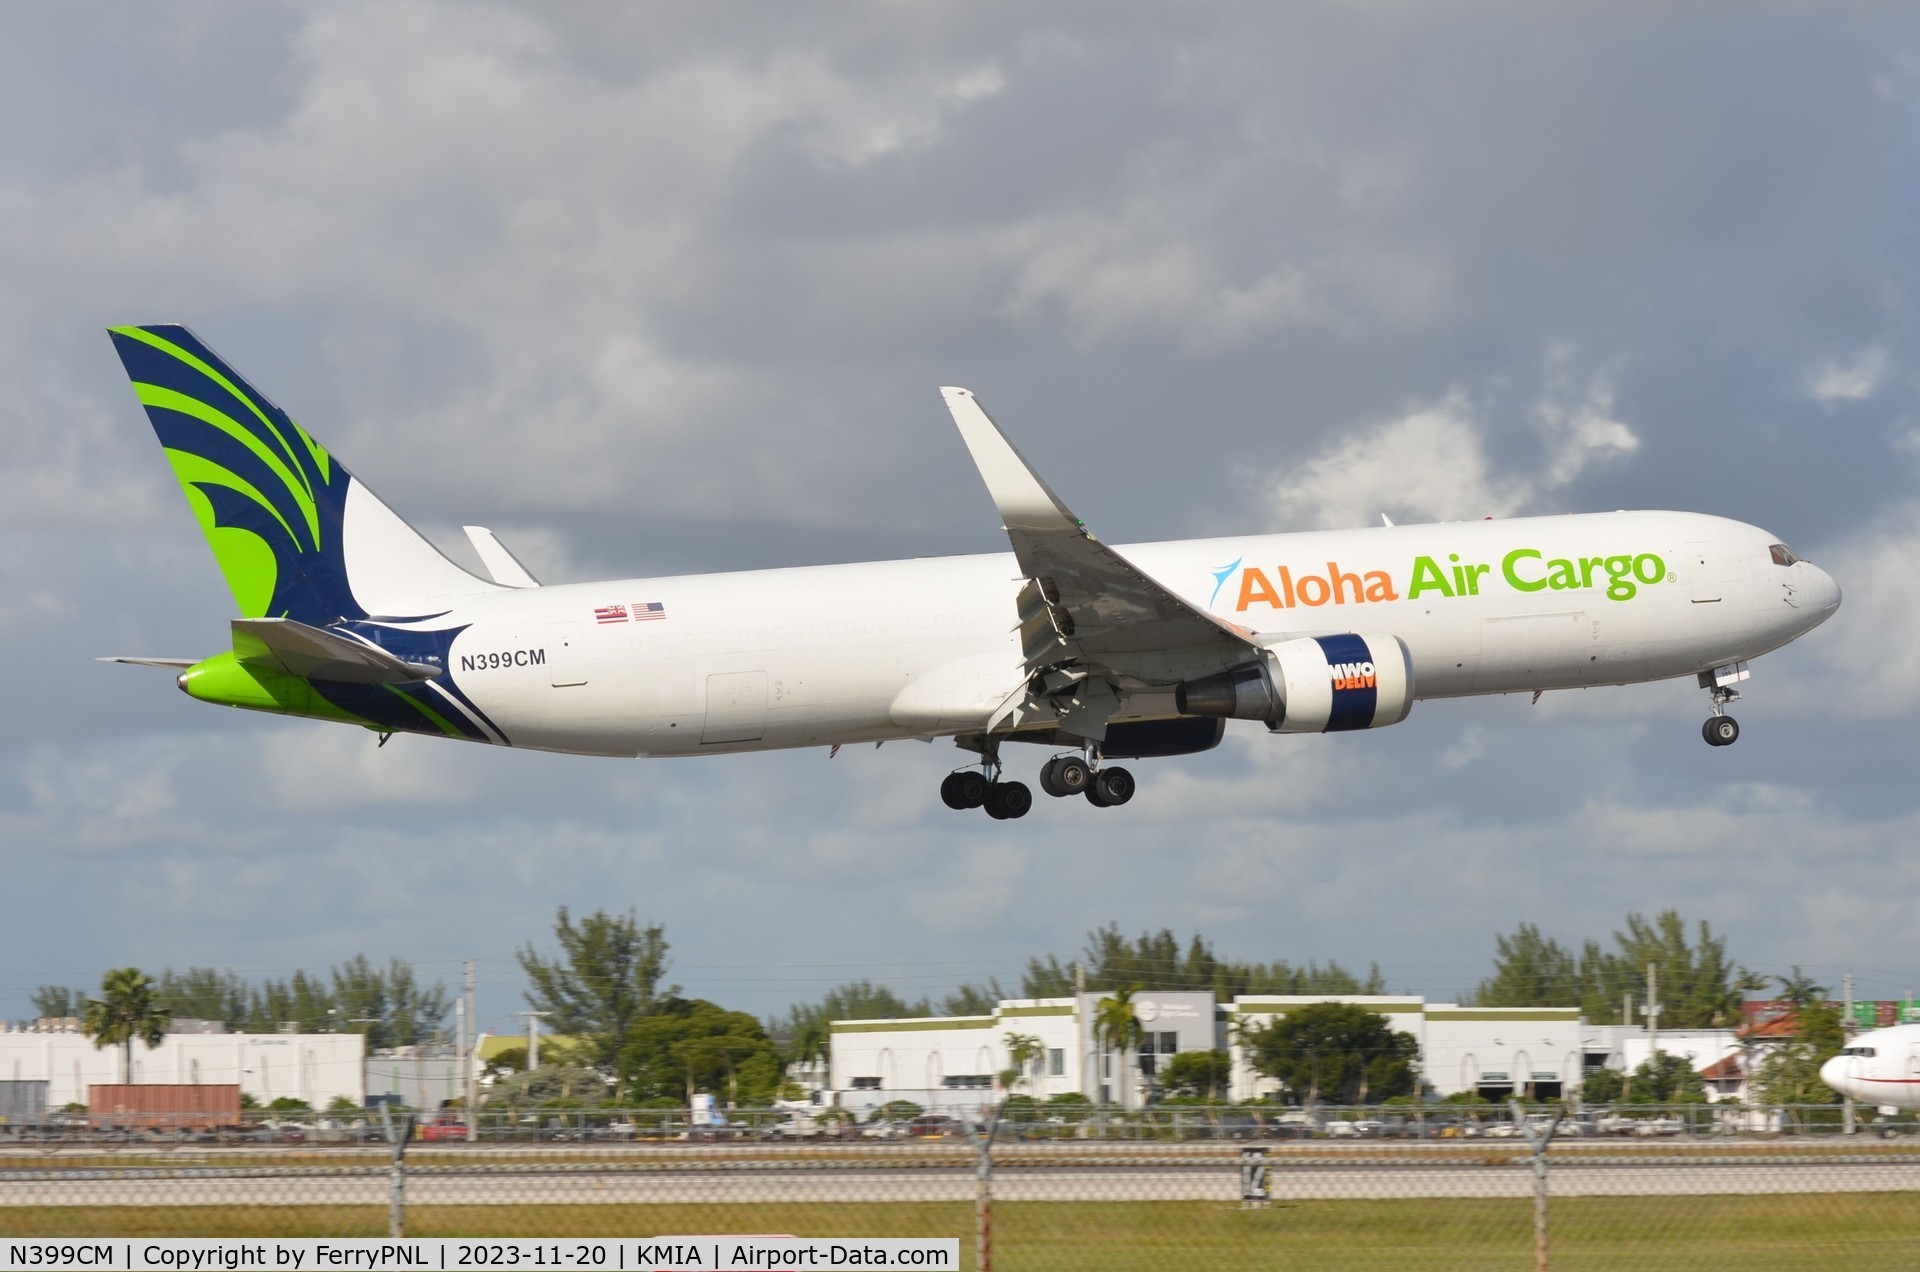 N399CM, 1993 Boeing 767-323/ER C/N 25451, Aloha Air Cargo B763 about to land in MIA